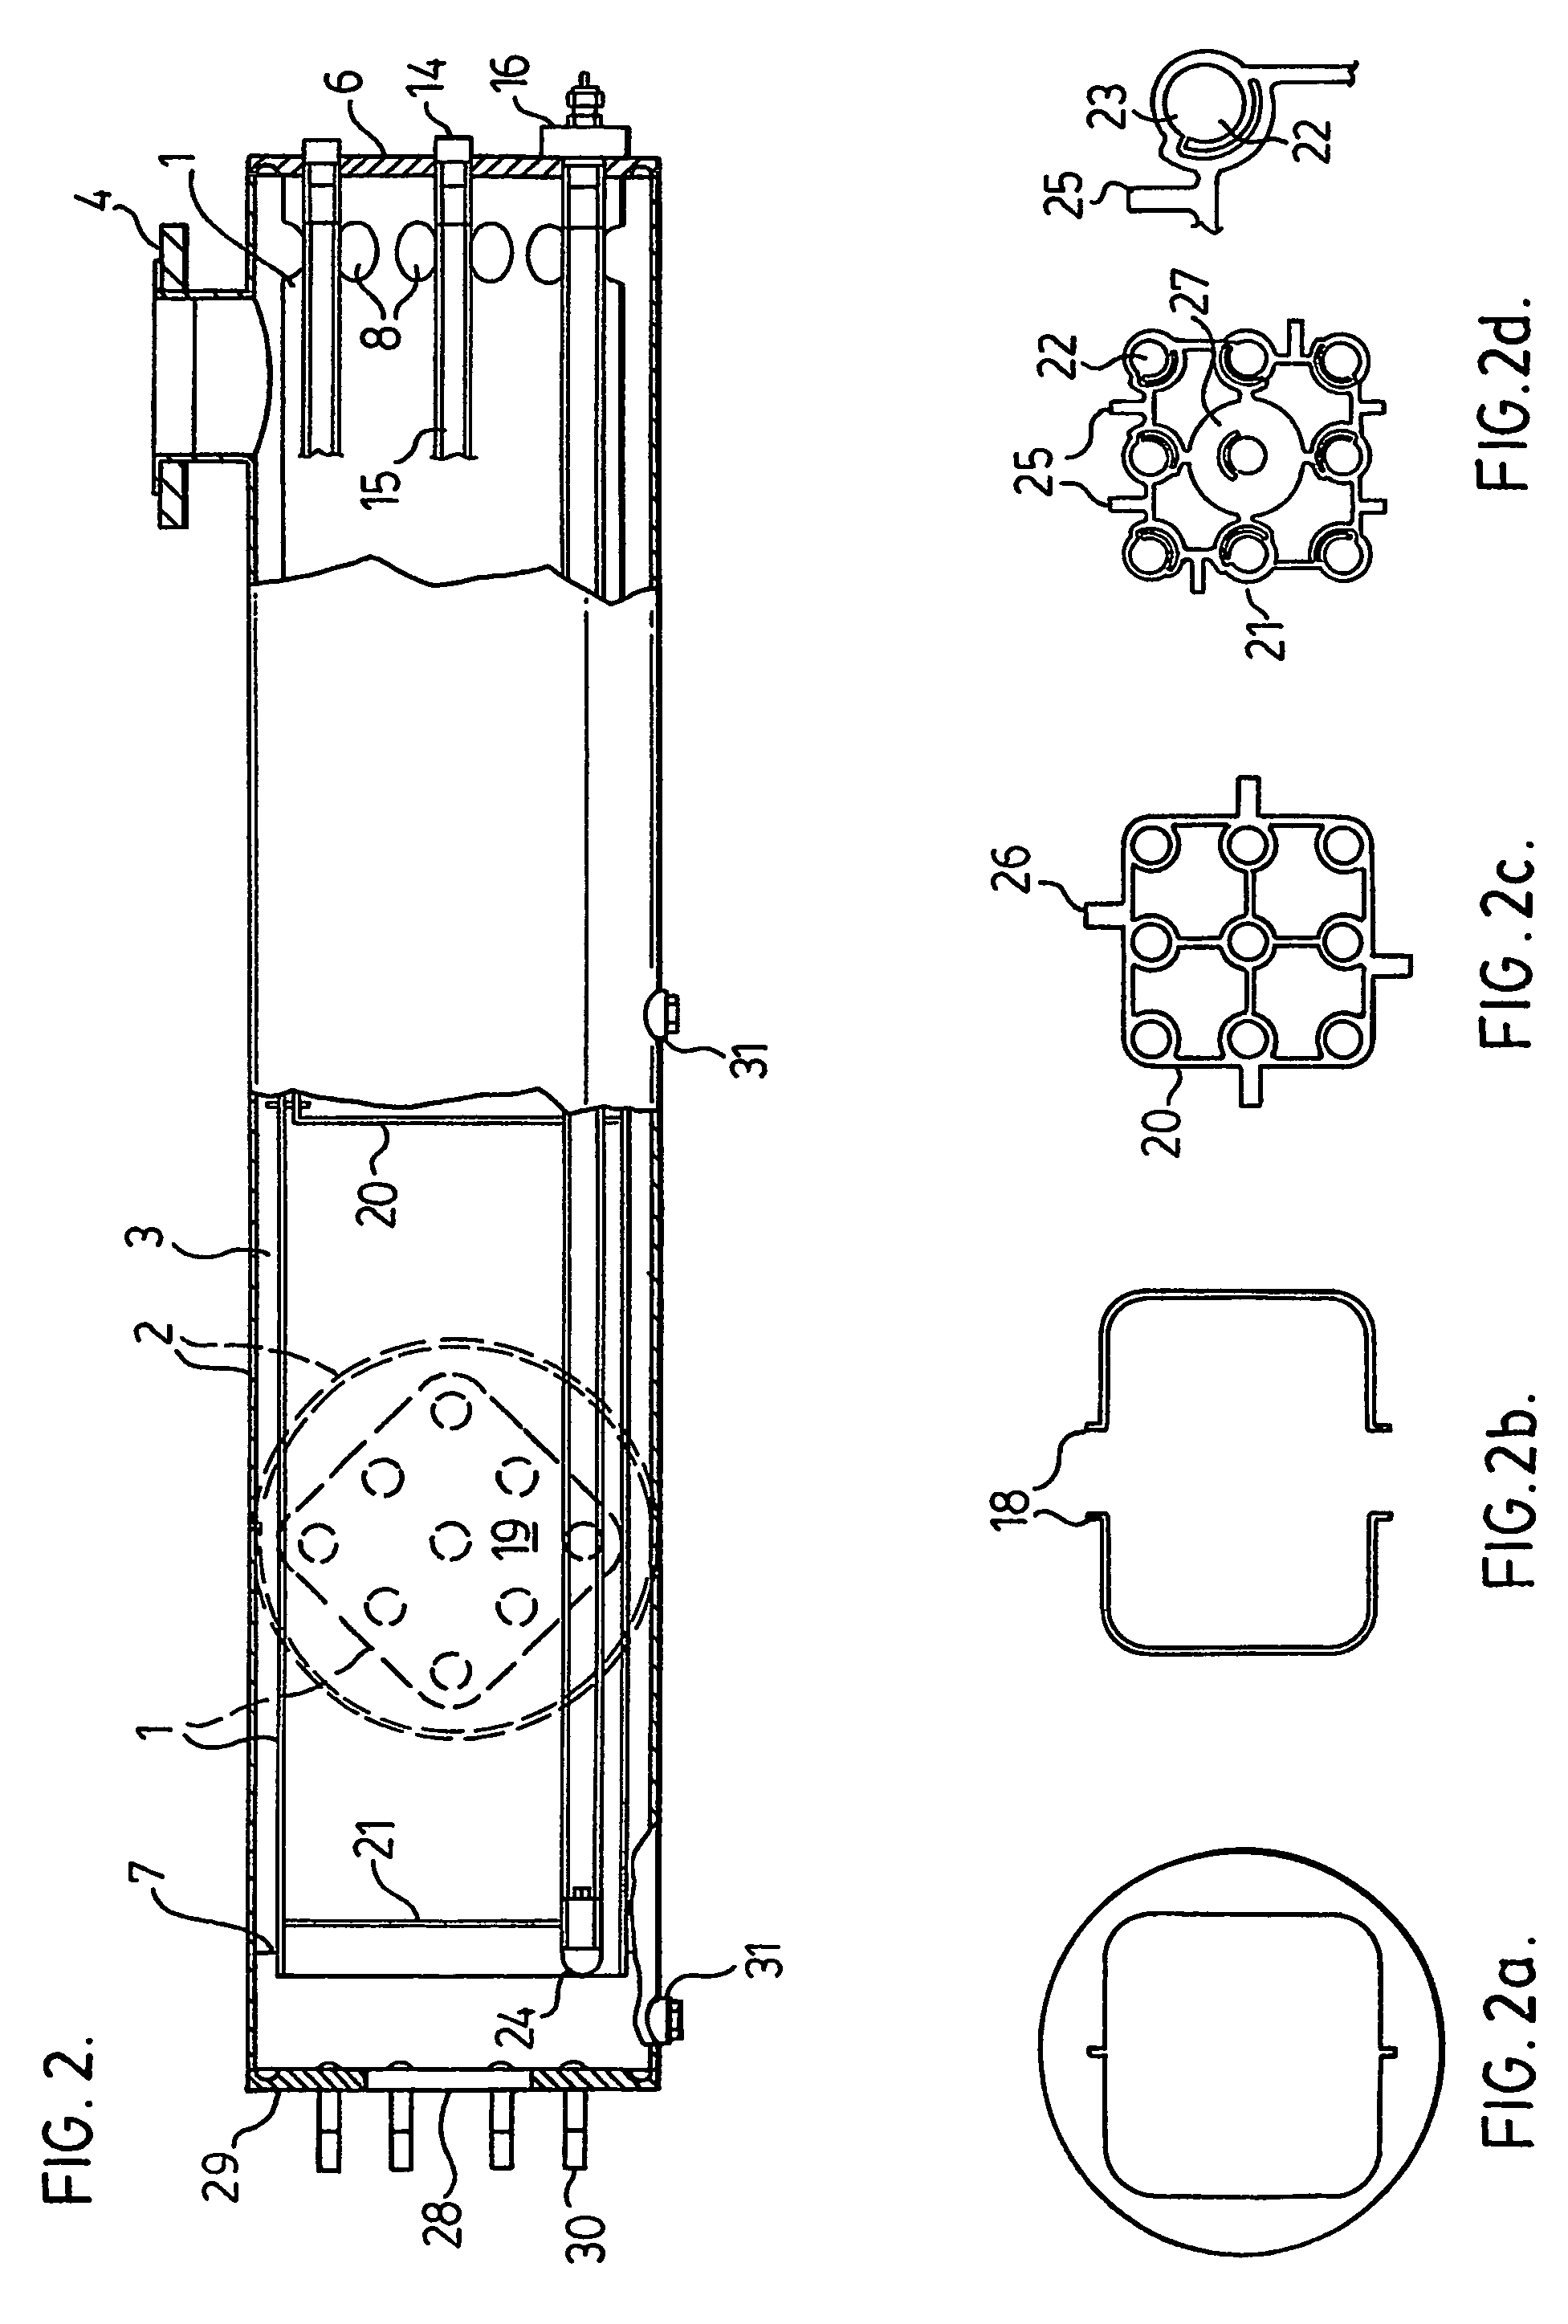 Double-walled chamber for ultraviolet radiation treatment of liquids